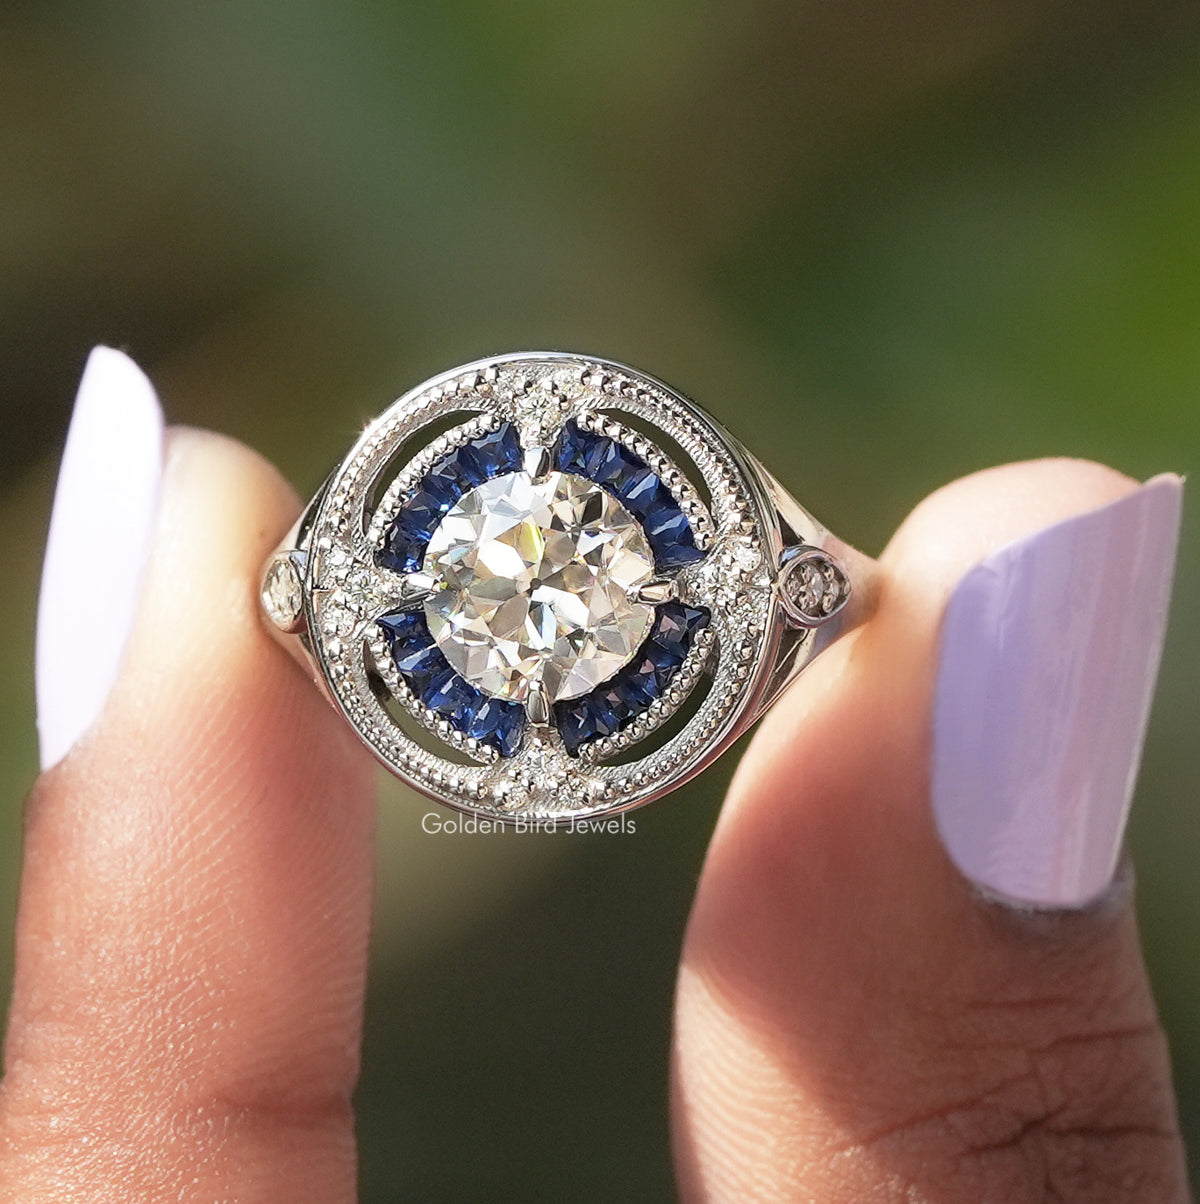 [In two finger front view of old european round cut moissanite ring made of white gold]-[Golden Bird Jewels]